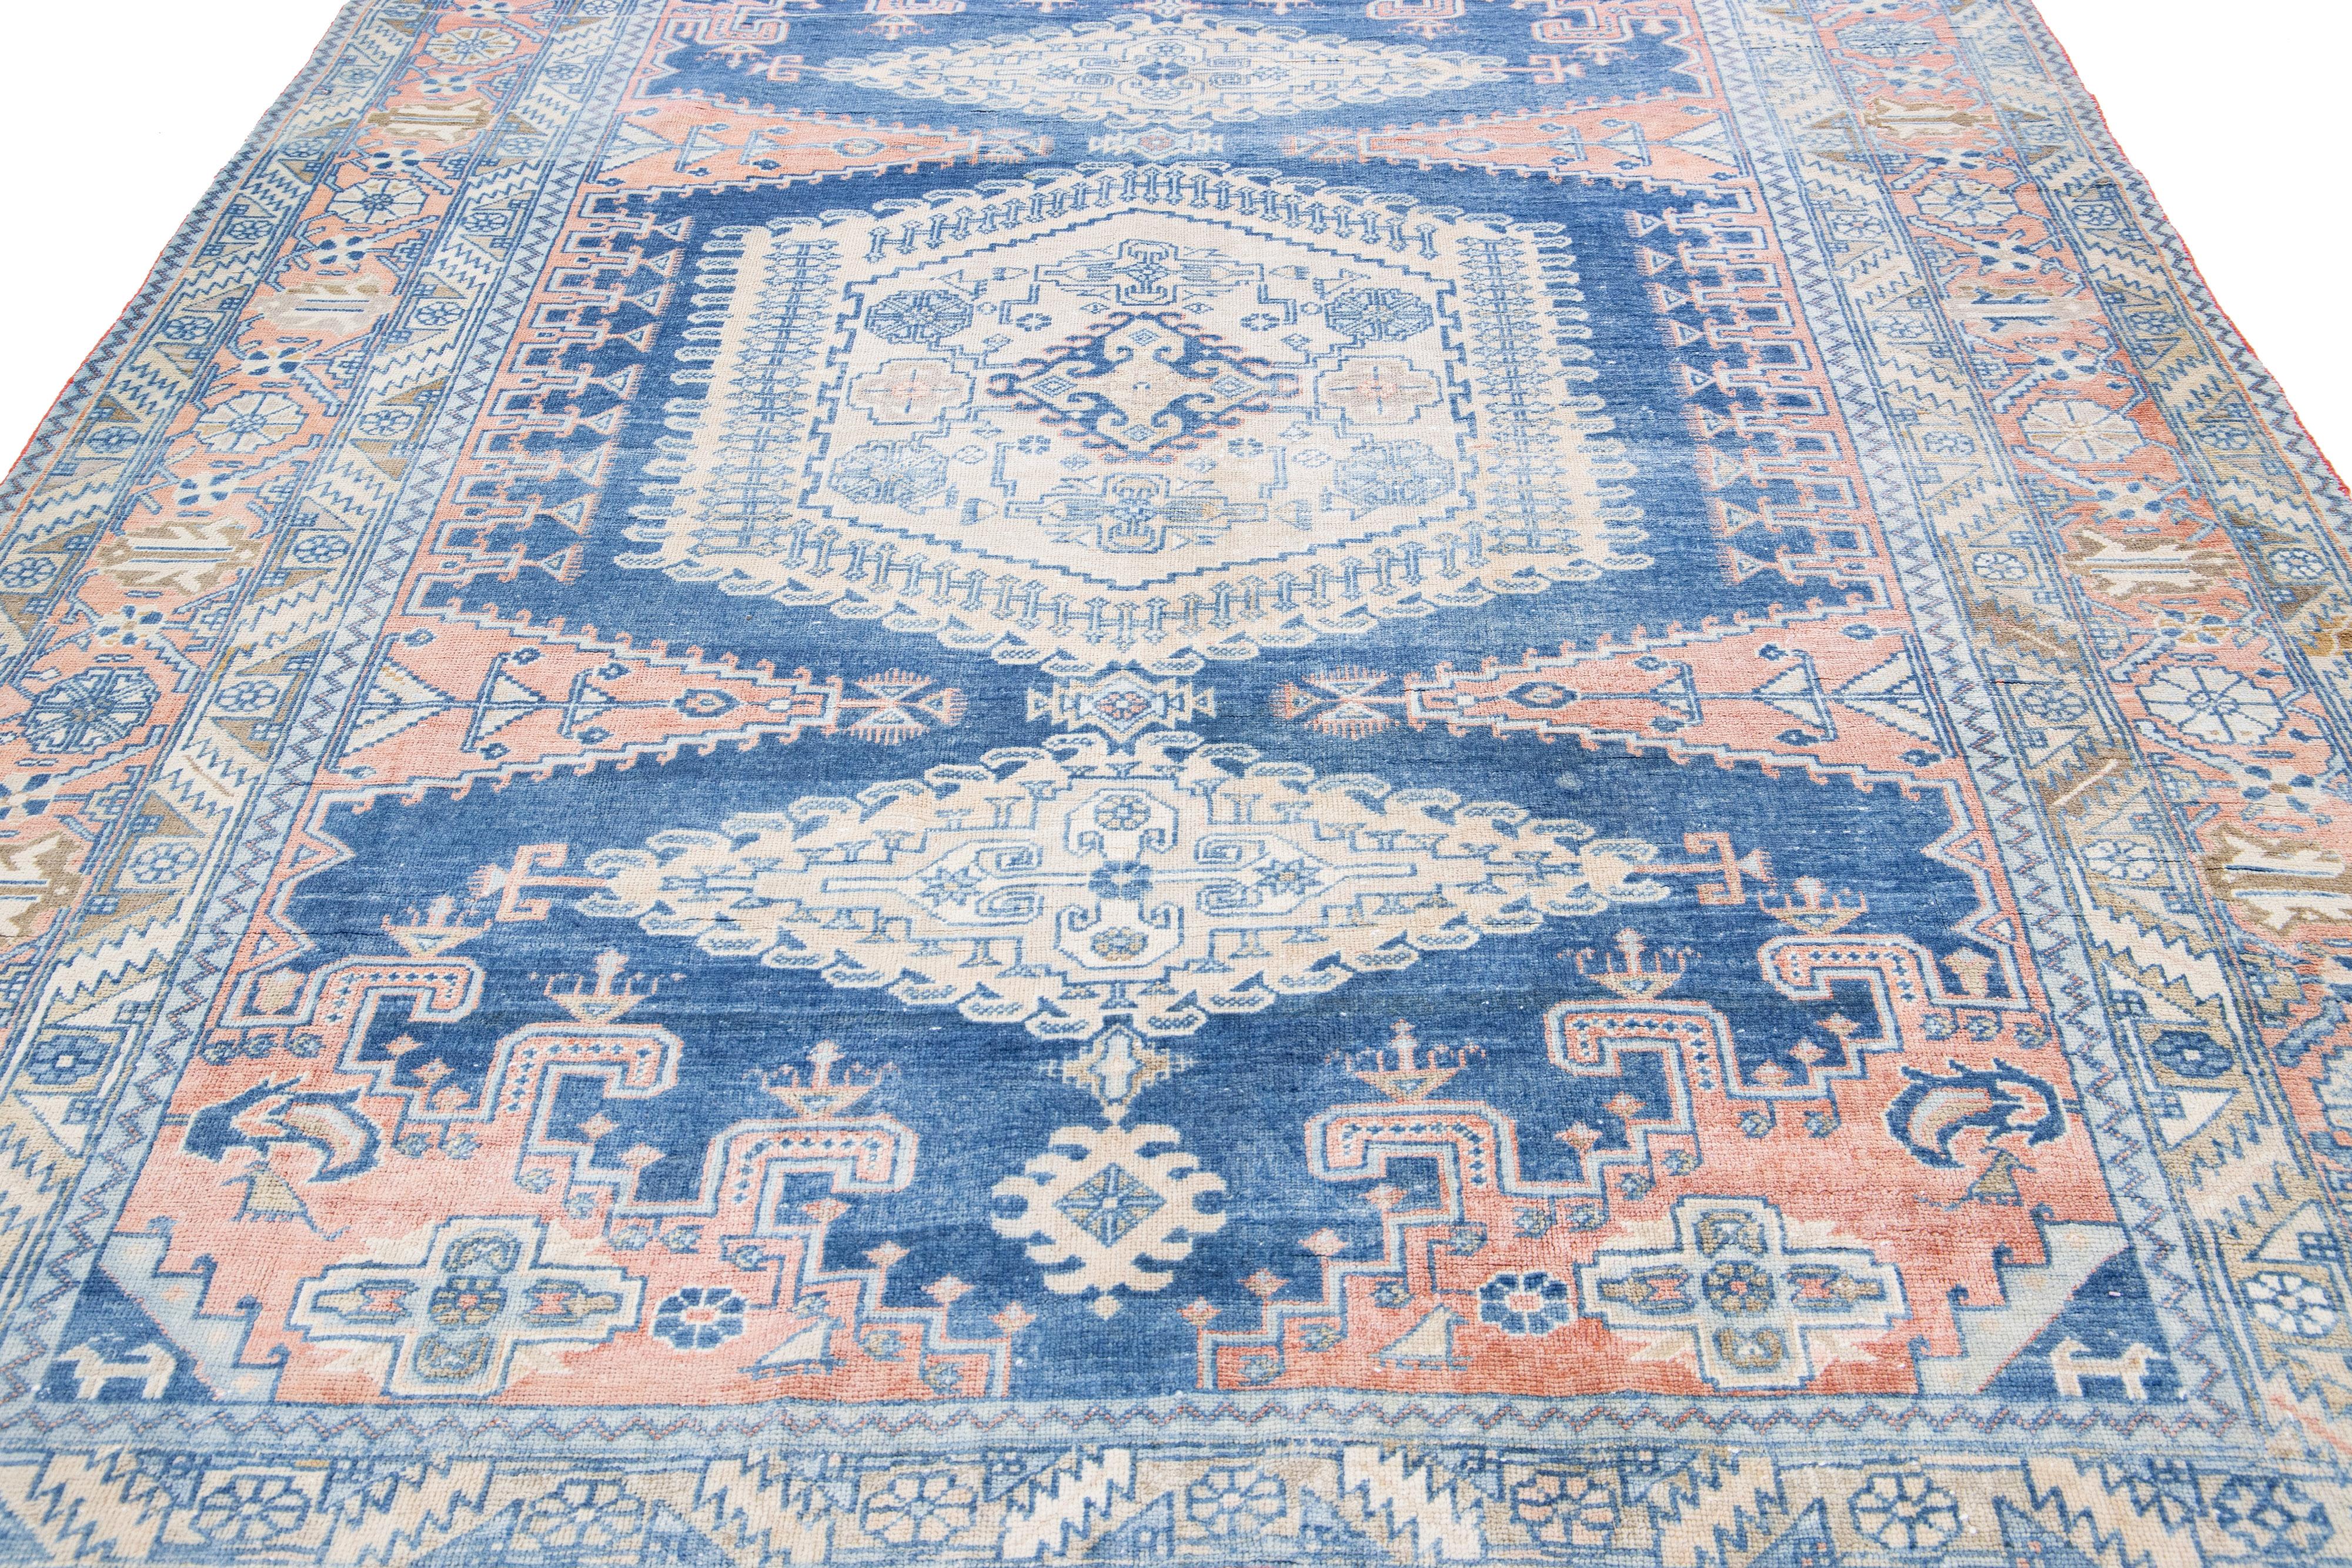 The hand-knotted wool and captivating medallion design Heriz rug exude elegance. The intricate floral pattern, beautifully constructed with detailed geometric shapes and vibrant blue accents, enhances the soft peach field, elevating it into a